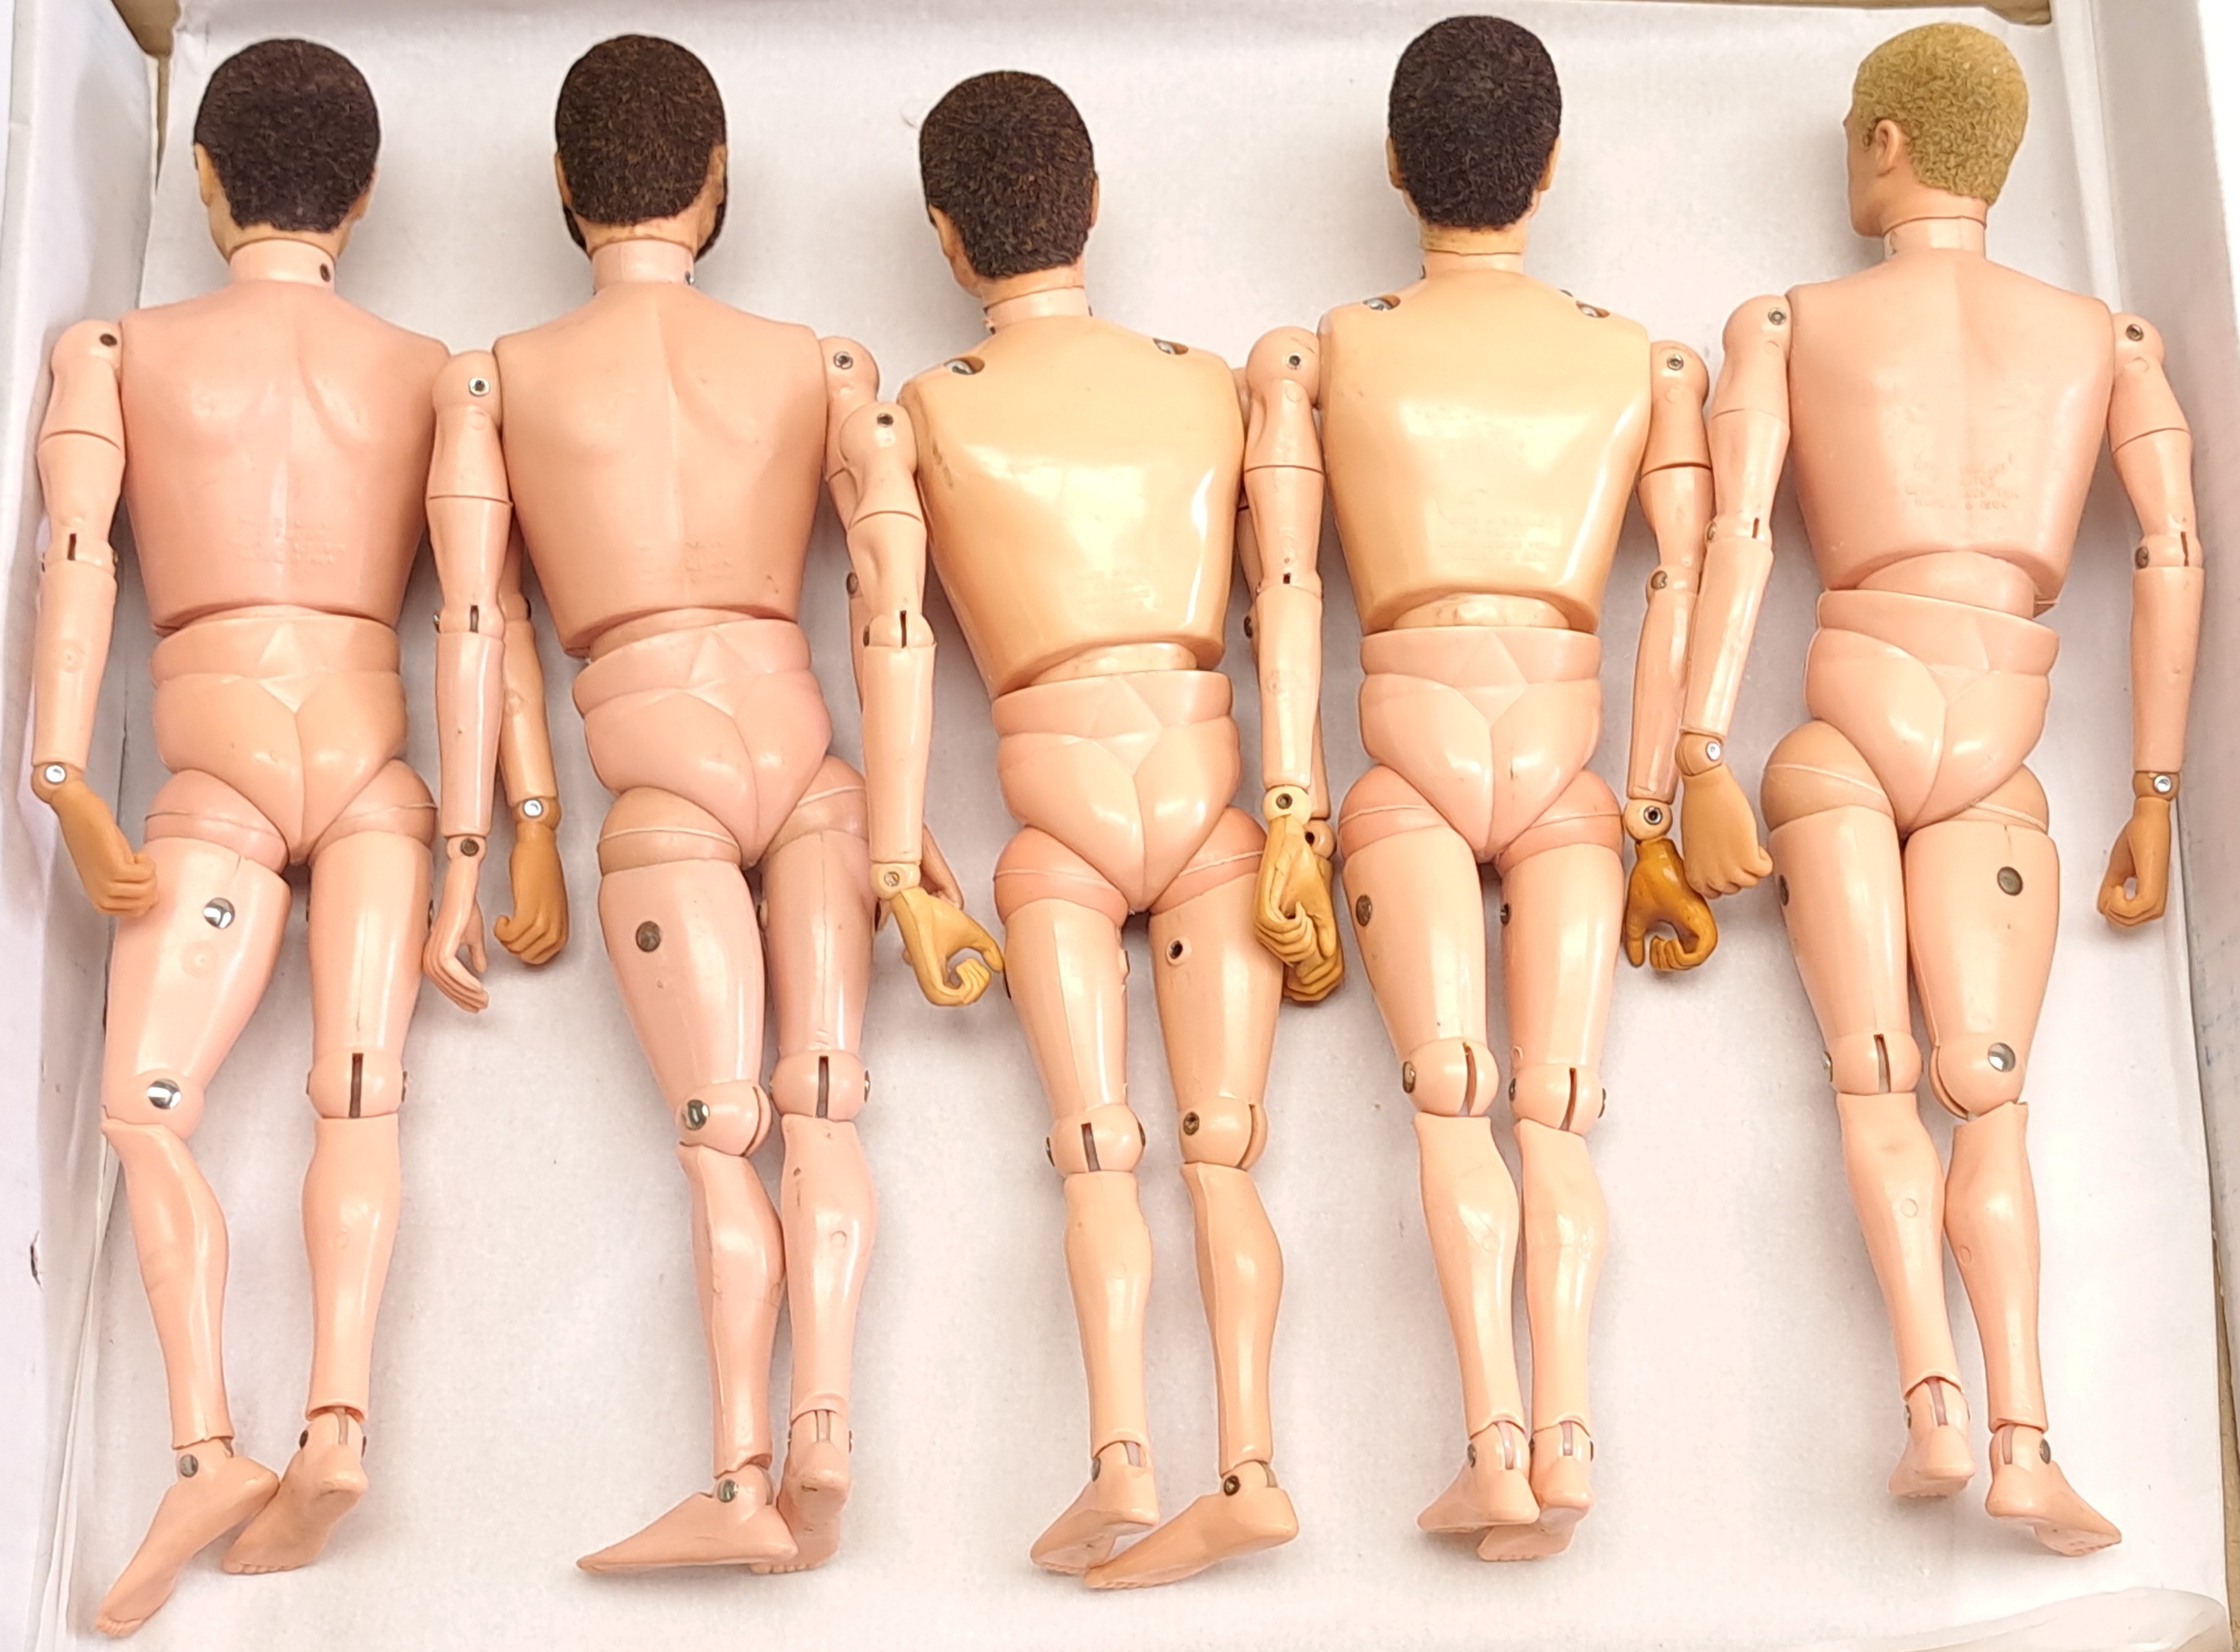 Palitoy Action Man vintage flock head figures/loose/undressed, a group which appear to be general... - Image 2 of 2